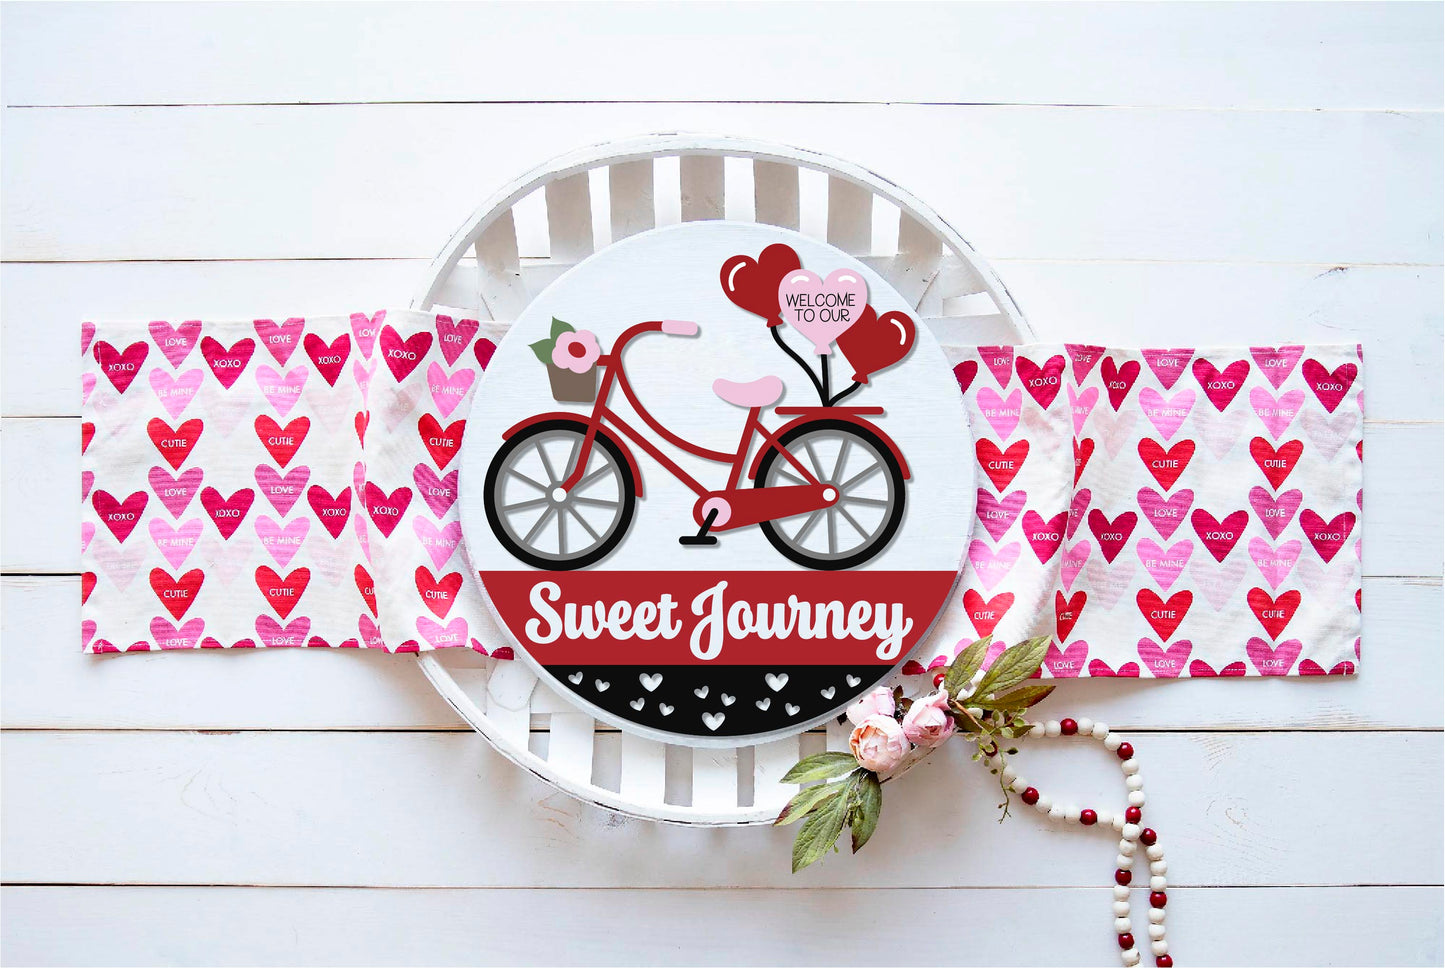 Welcome to our Sweet Journey Valentine sign